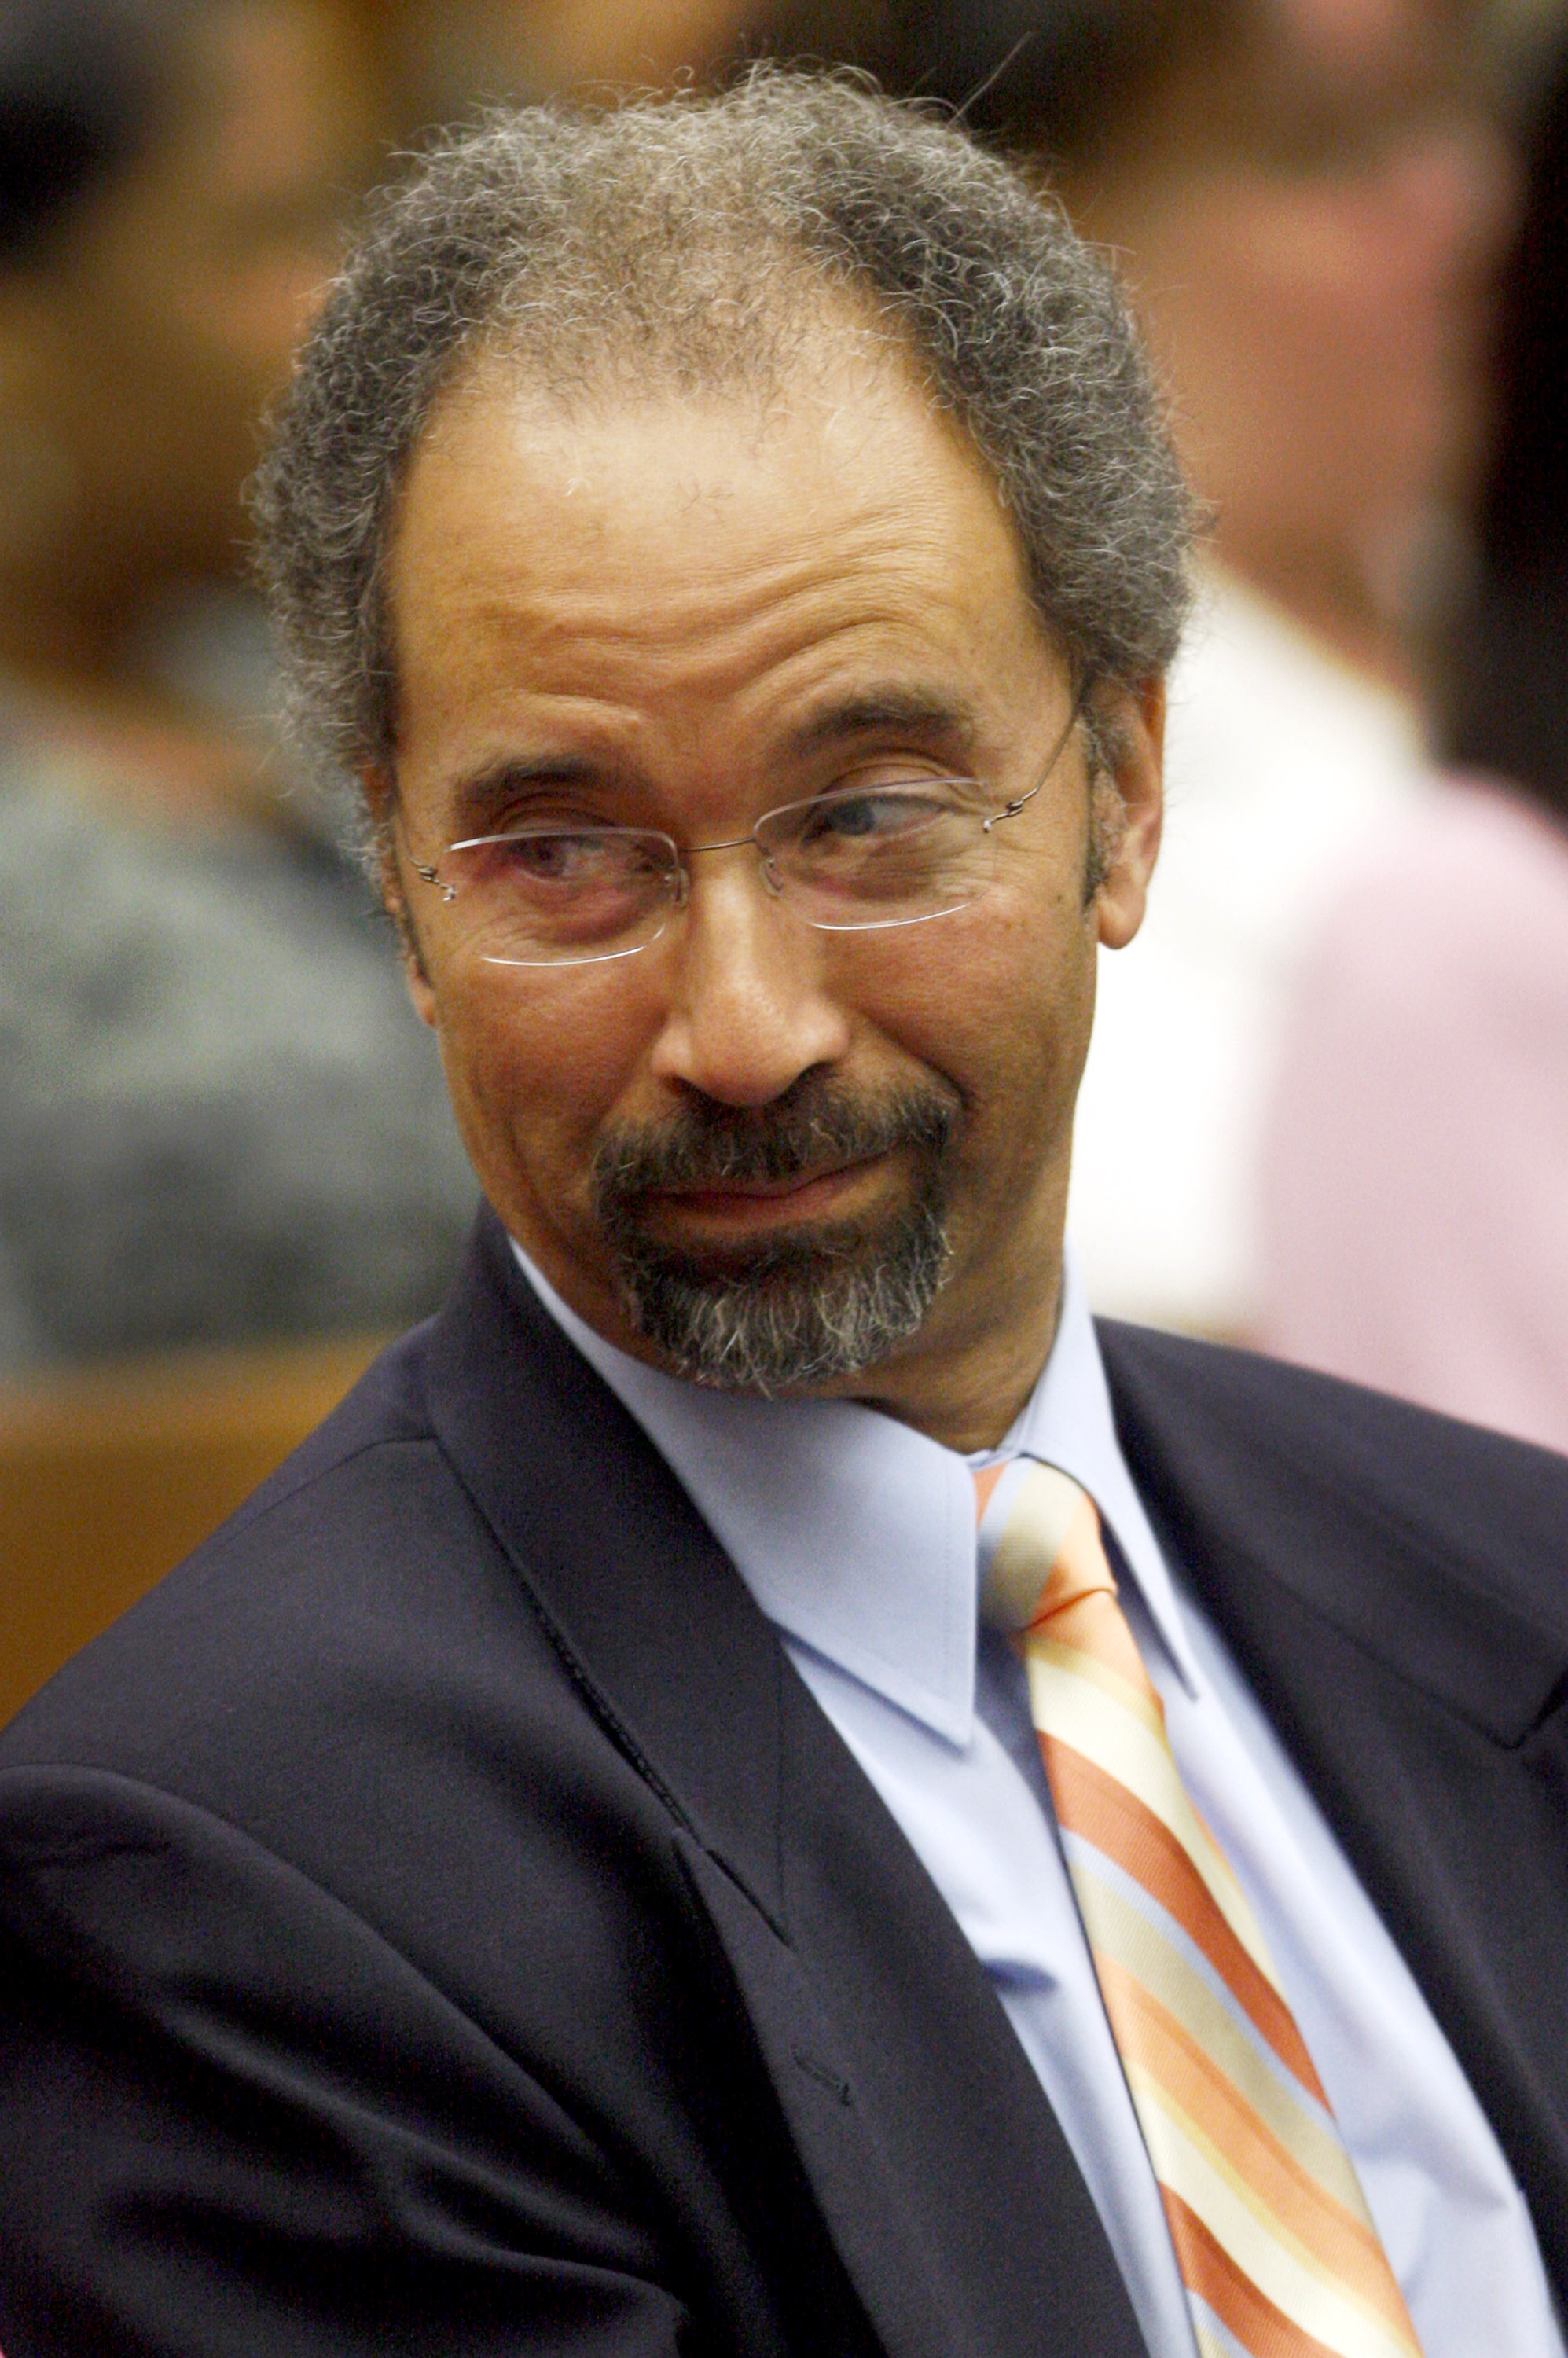 U.S. District Judge Richard W. Roberts is pictured before the start of a ceremony at the federal courthouse in Washington, May 1, 2008 (Charles Dharapak—AP)